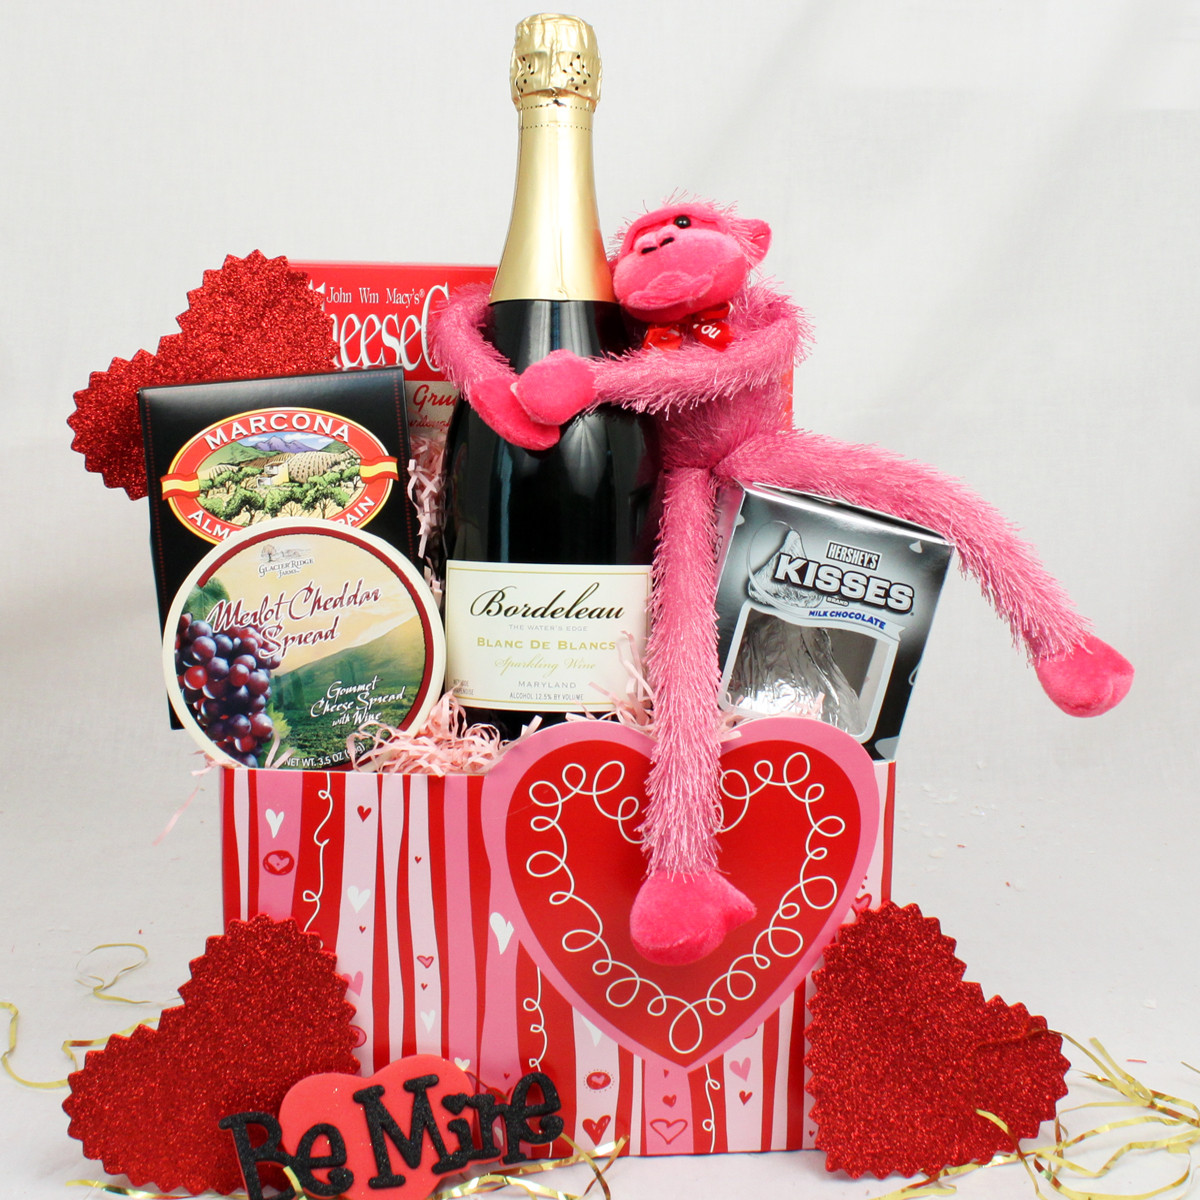 Creative Valentine Day Gift Ideas For Her
 Creative and Thoughtful Valentine’s Day Gifts for Her